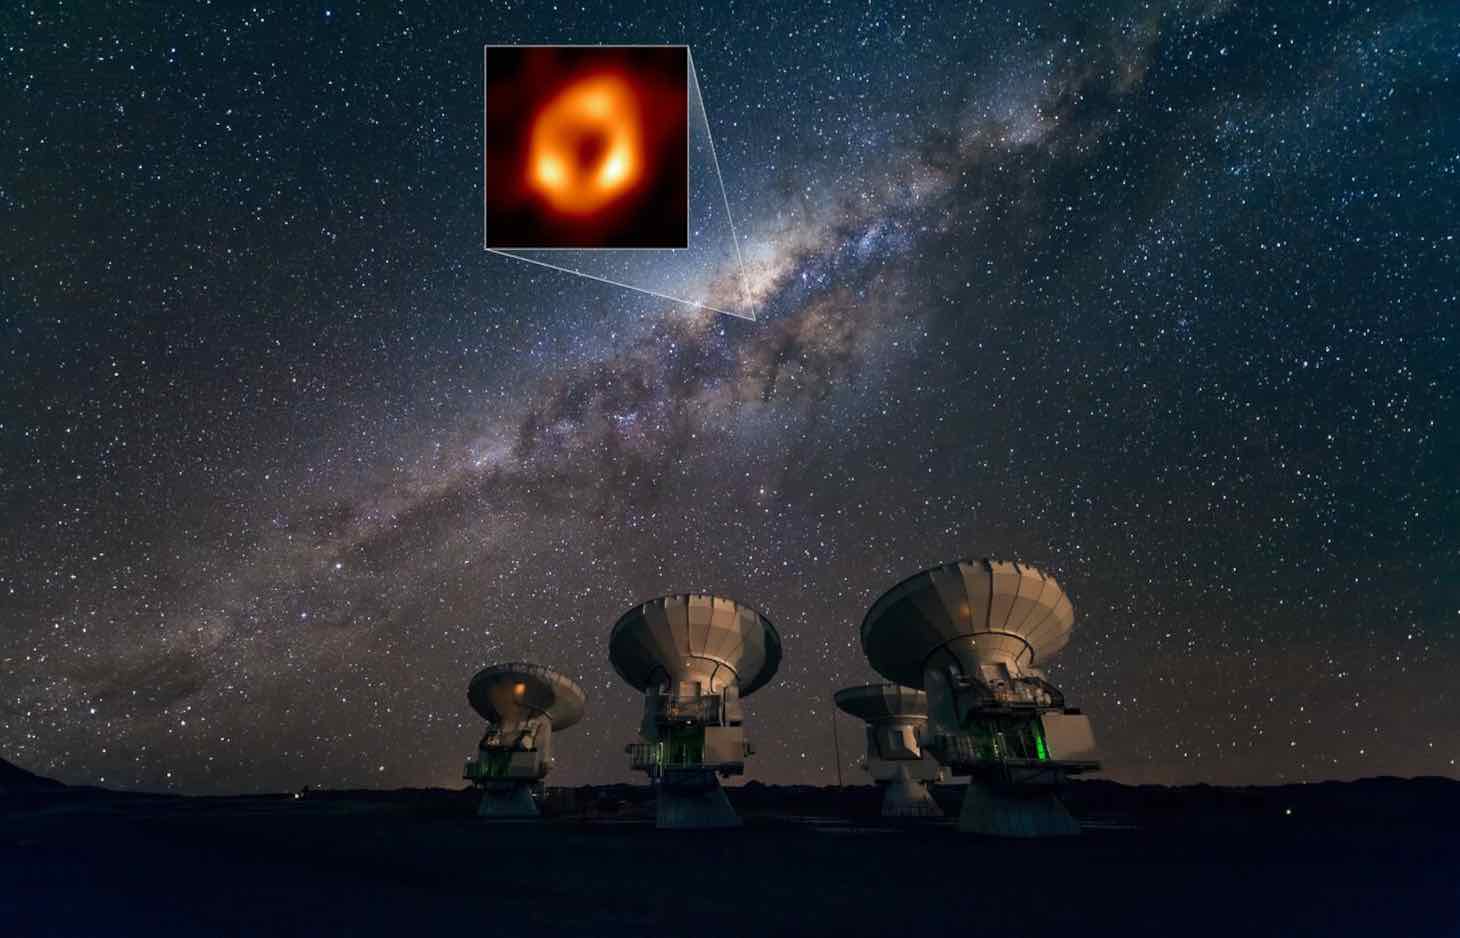 The Atacama Large Millimeter/submillimeter Array (ALMA) looking up at the Milky Way as well as the location of Sagittarius A*, the supermassive black hole at our galactic centre. © ESO/José Francisco Salgado. EHT Collaboration